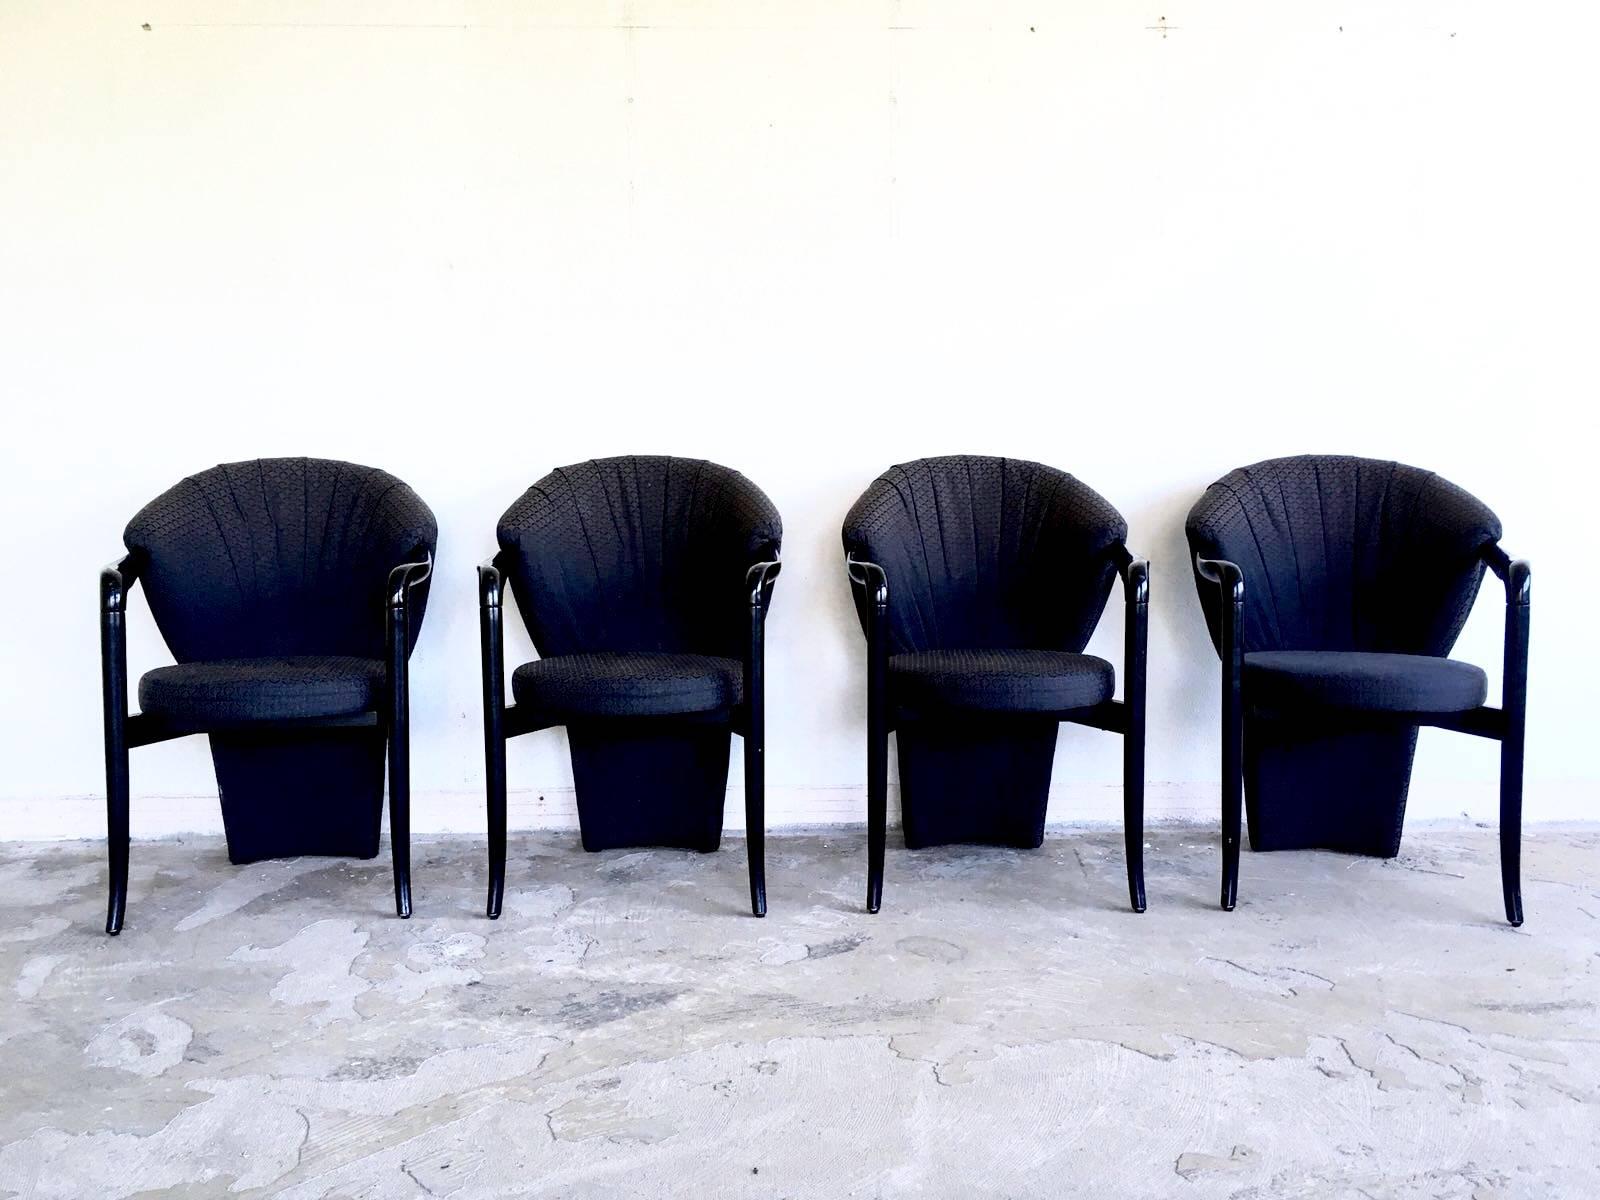 Majestic and exclusive style dining room chairs with Pietro Constantini as their designer. This set consists of four typical 1980s style chairs and feature black lacquered base with a black pattern colored fabric. They remain in good condition, with